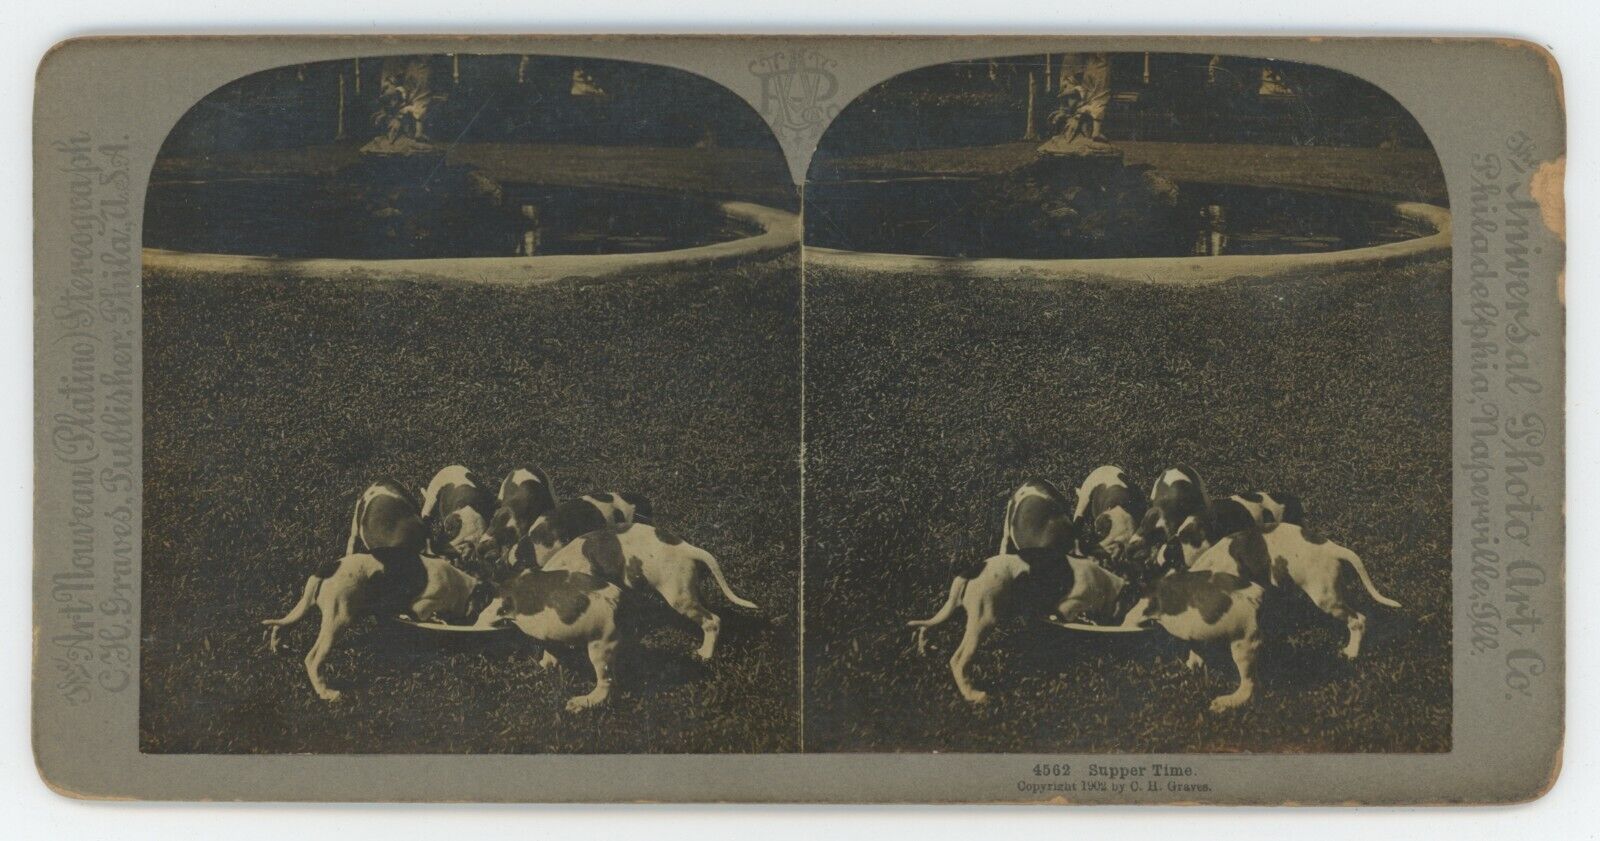 1903 Real Photo Stereoview Supper Time. Seven Adorable Puppies Eating on Lawn